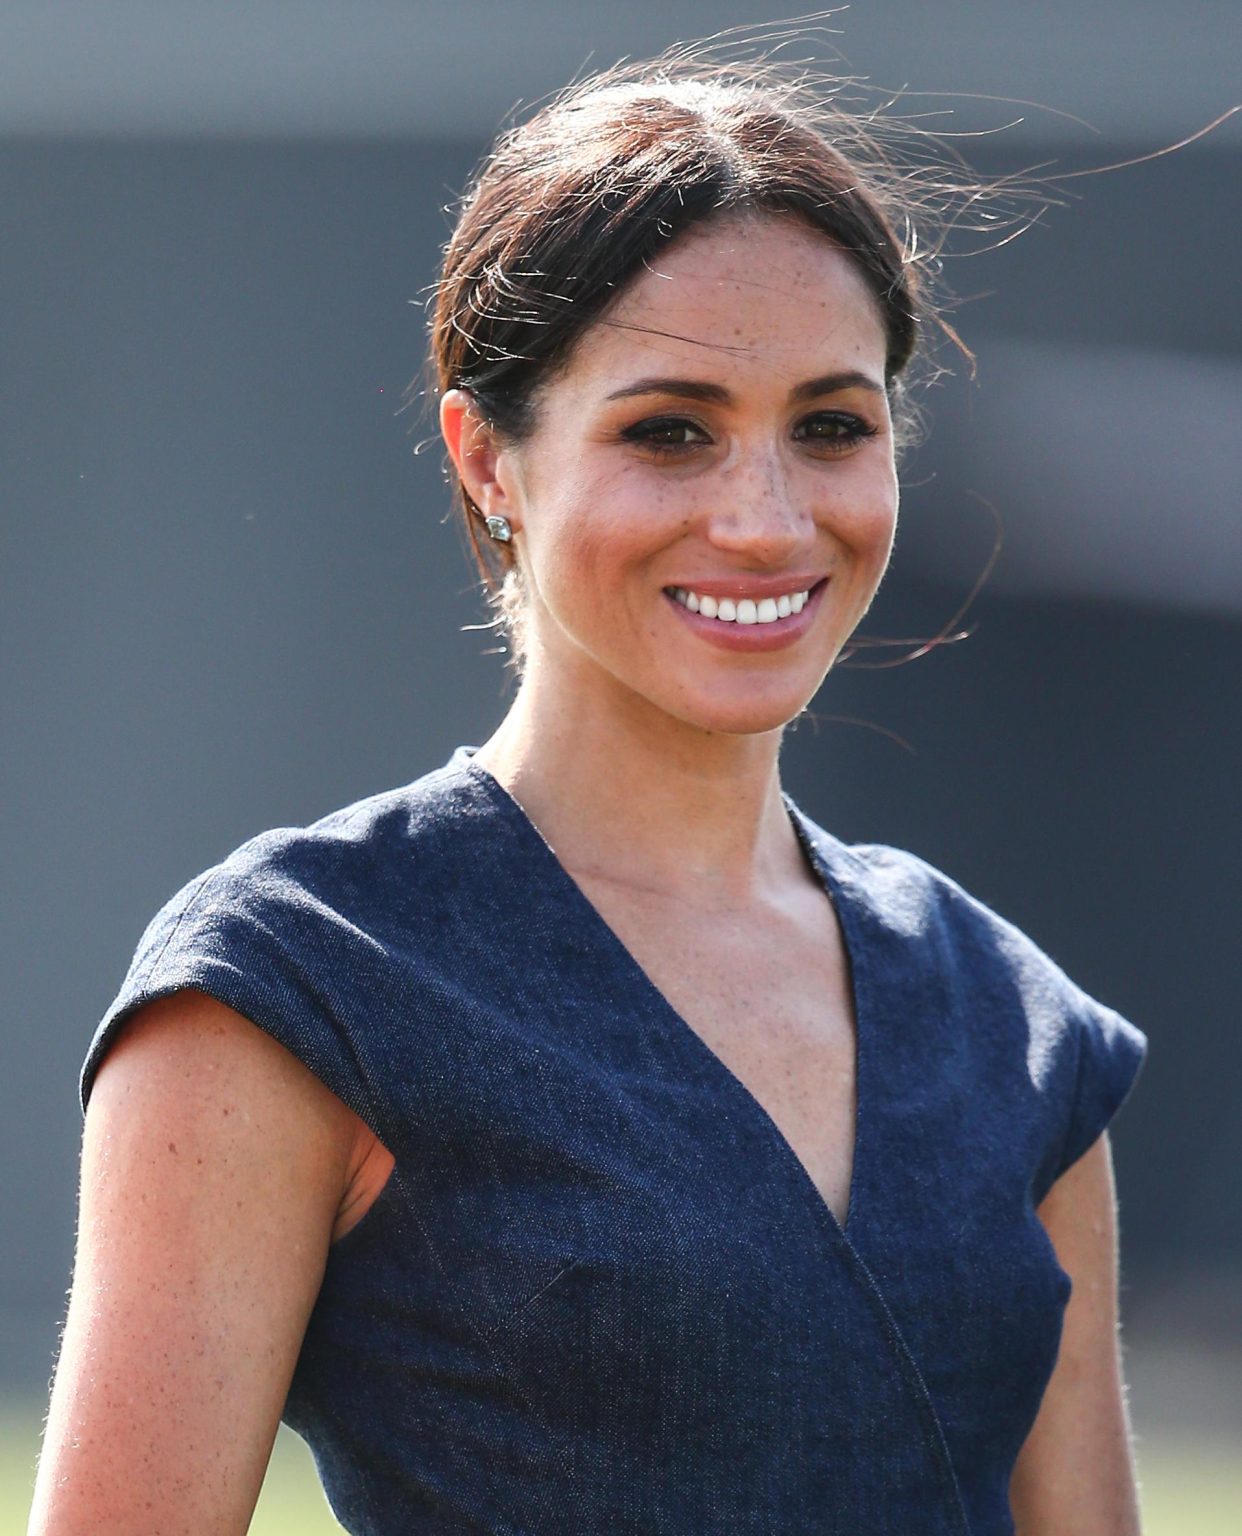 Who has Meghan Markle dated? Meghan Markle Dating History